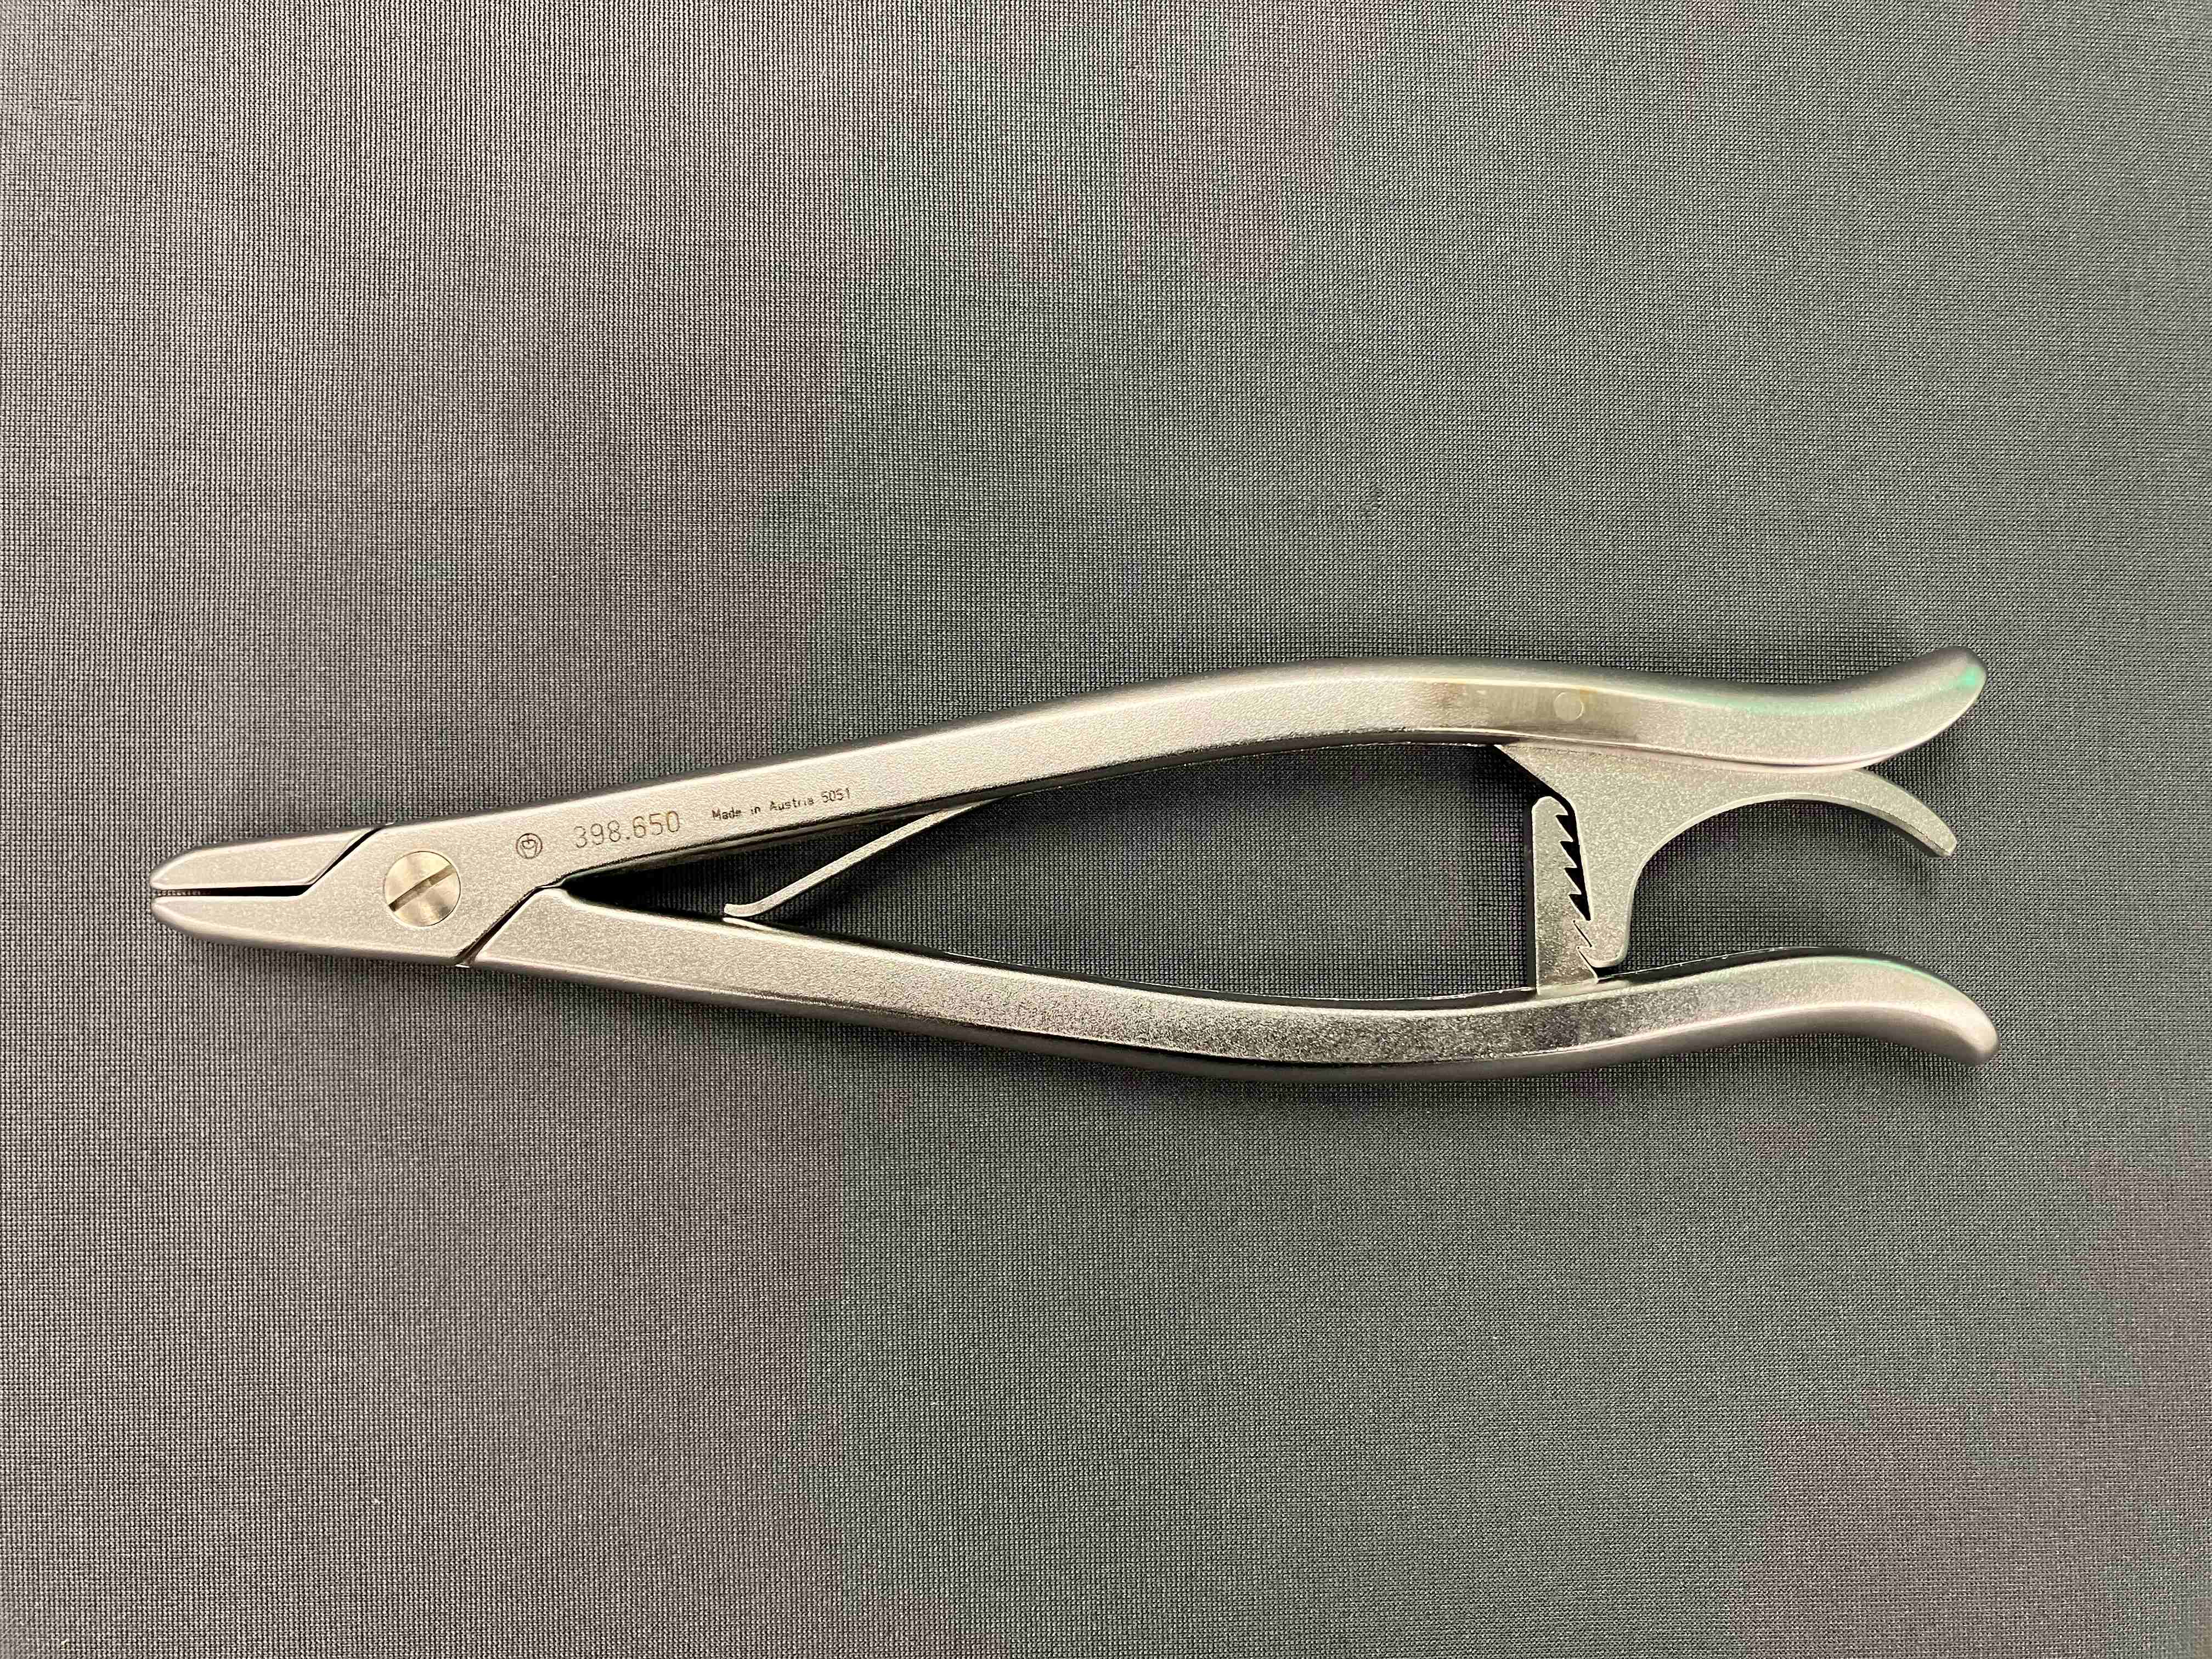 Synthes 398.650 Surgical Screw Removal Pliers